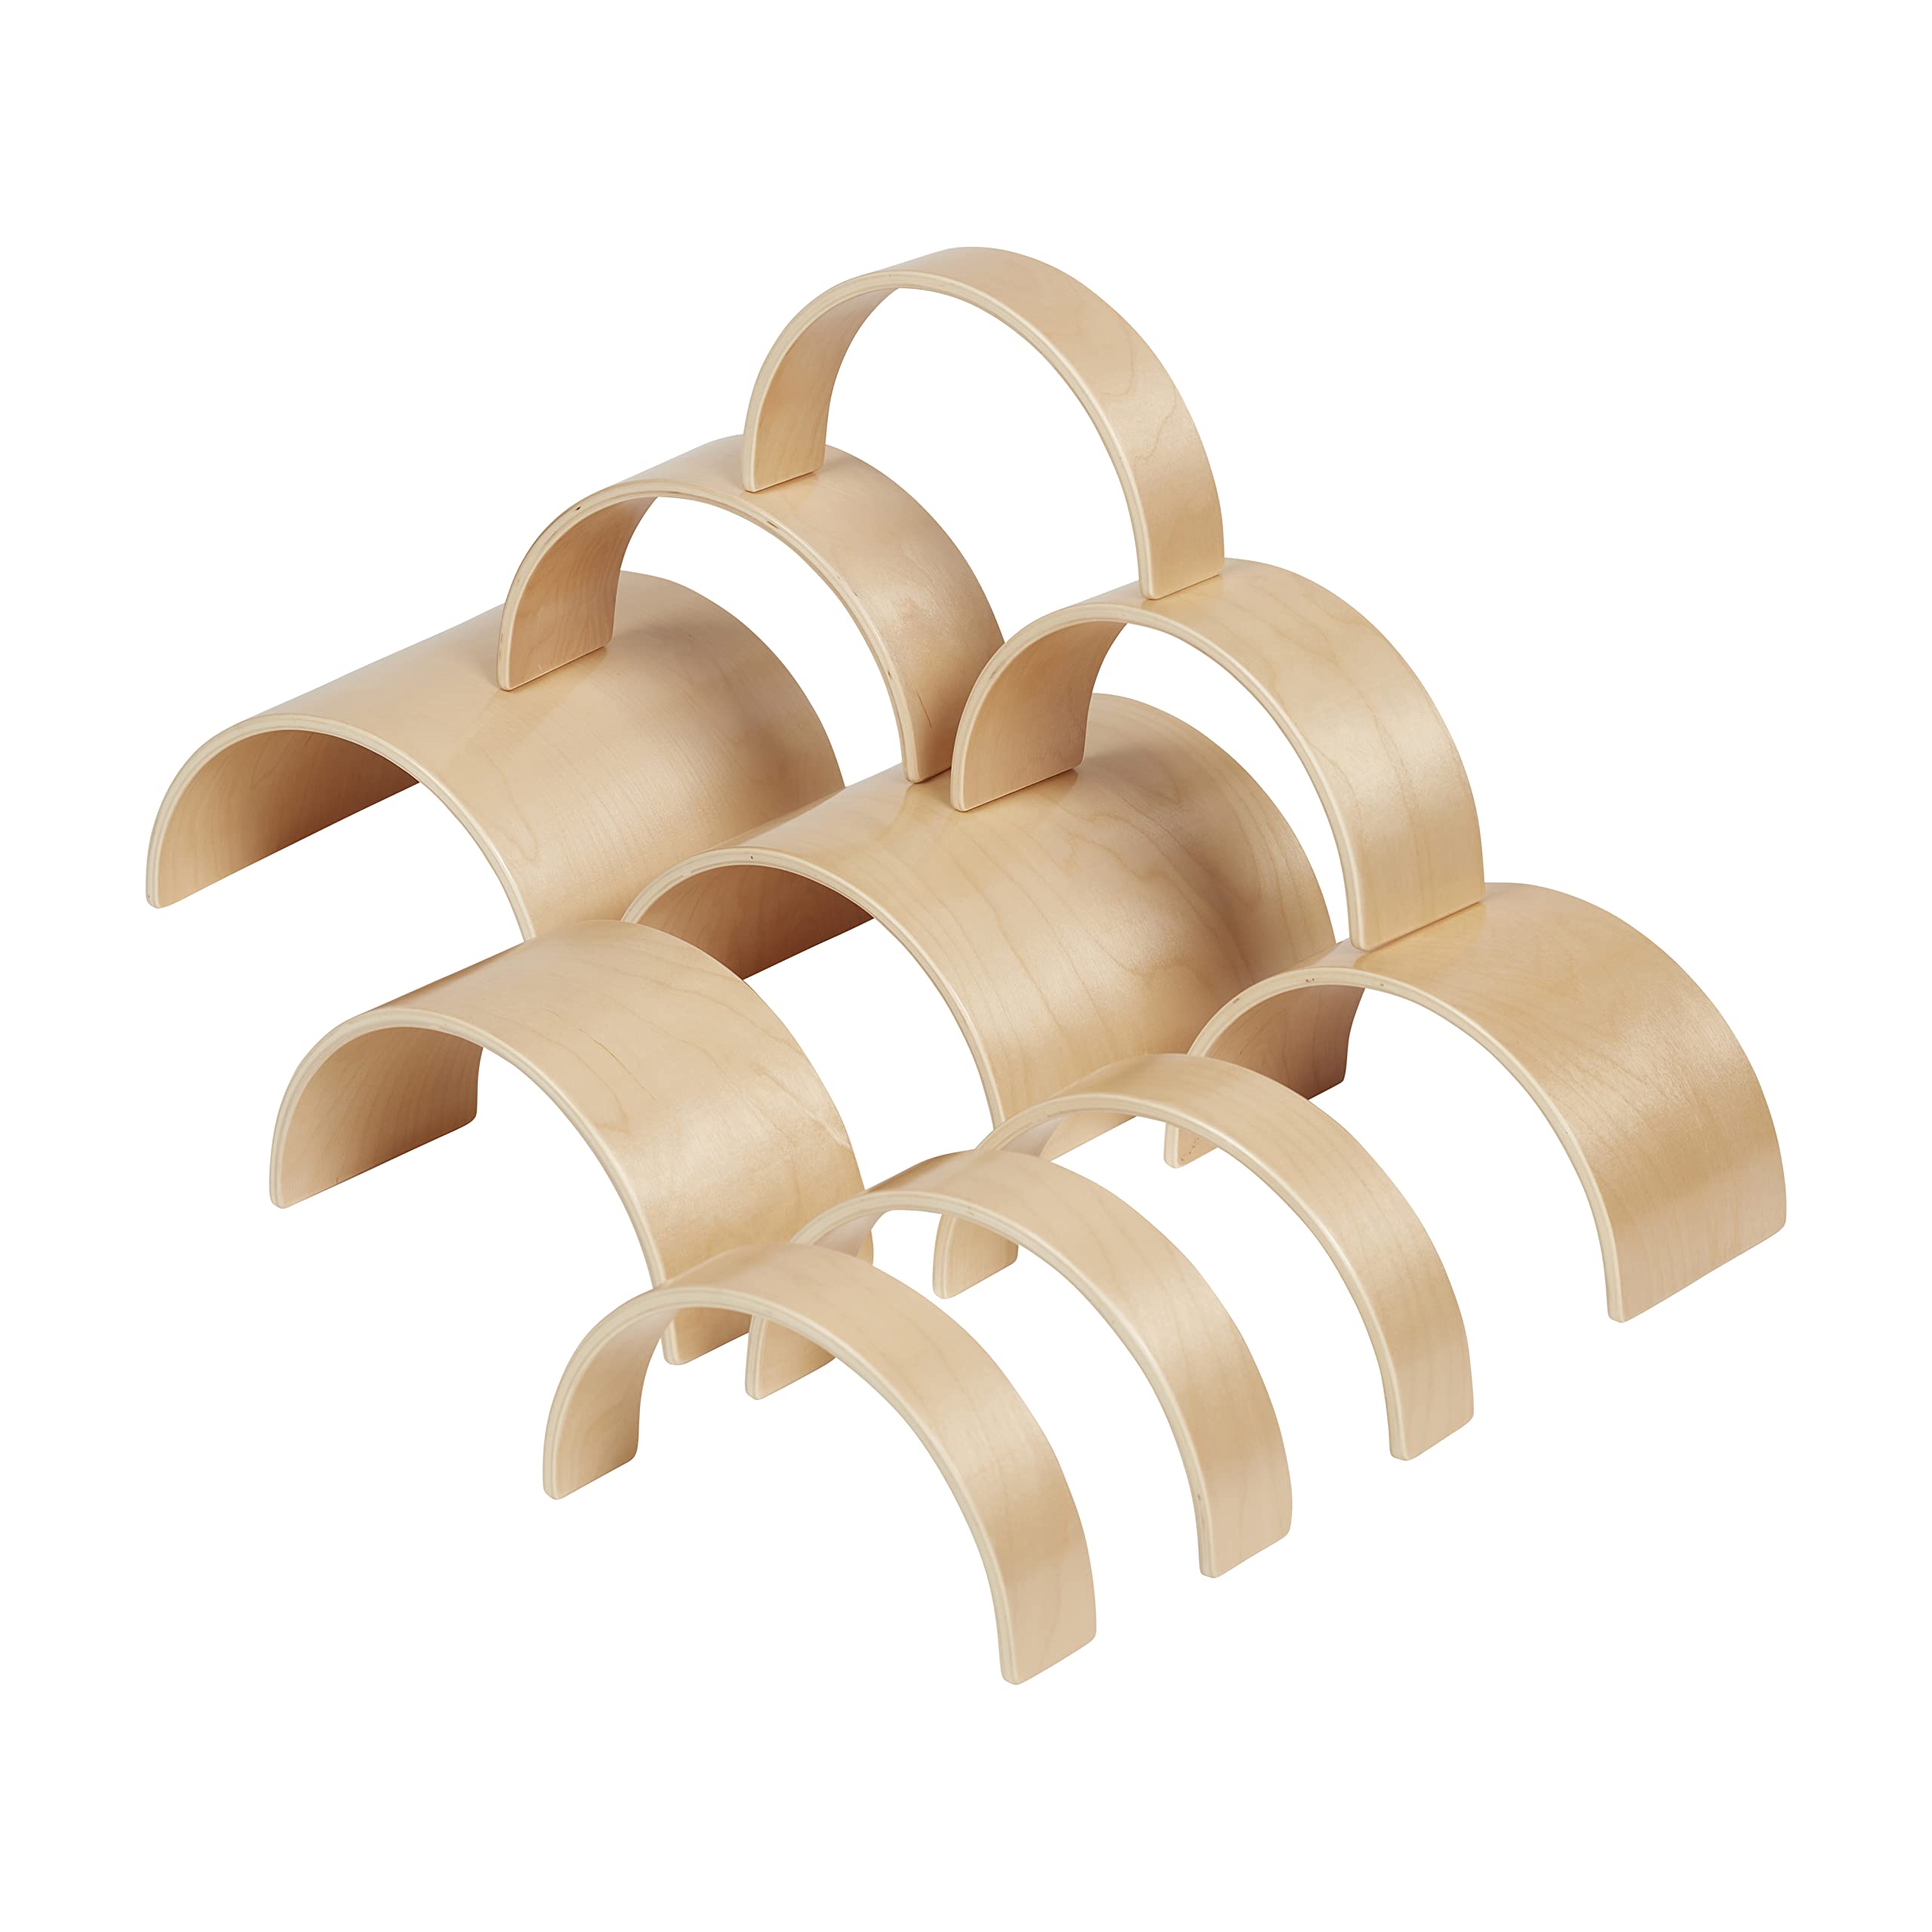 ECR4Kids Wooden Tunnels and Arches, Block Play, Natural, 10-Piece